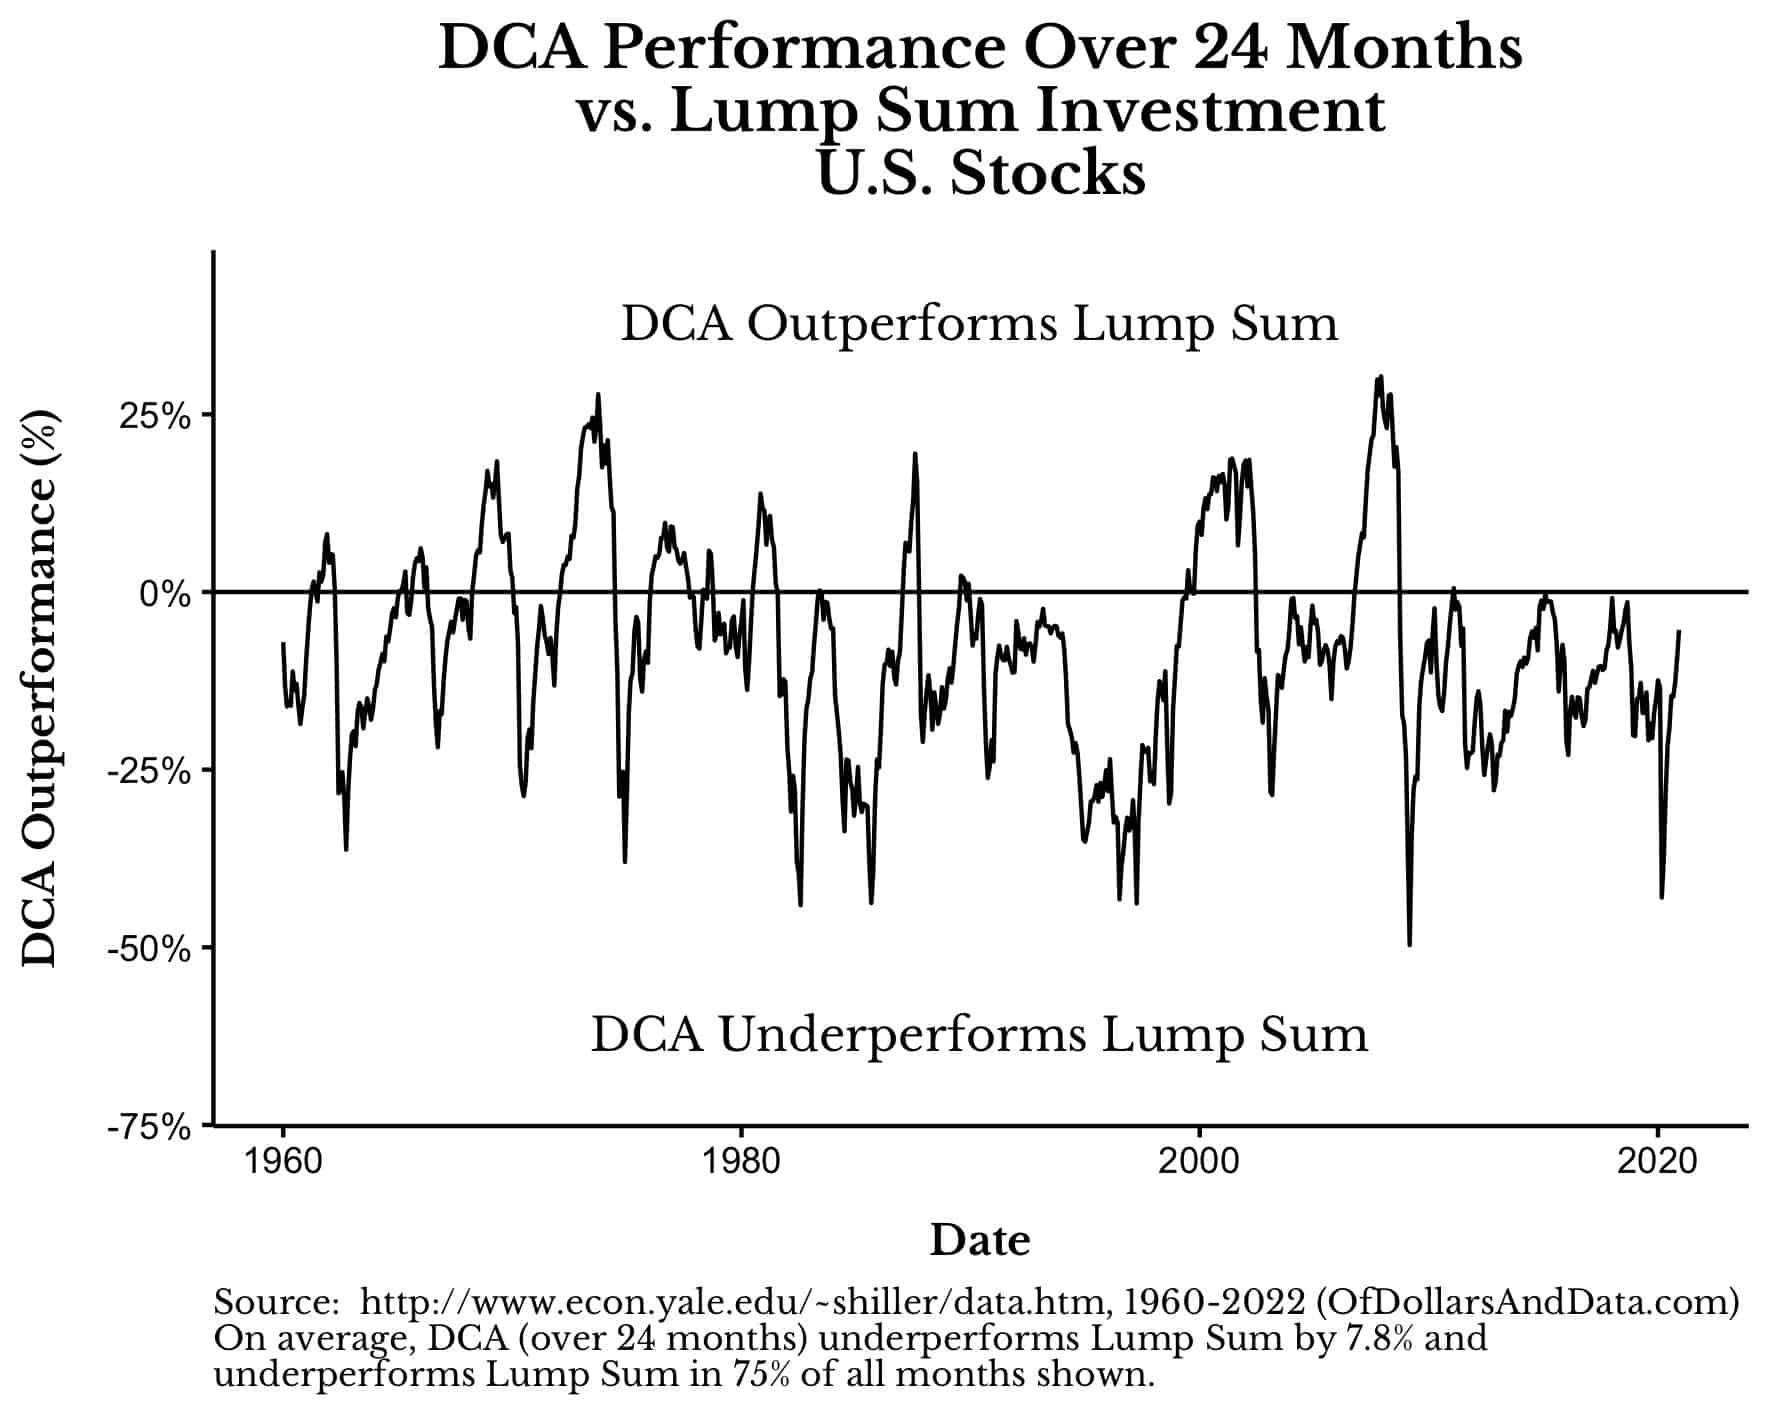 DCA vs Lump Sum performance over 24 months into U.S. stocks from 1960-2022.